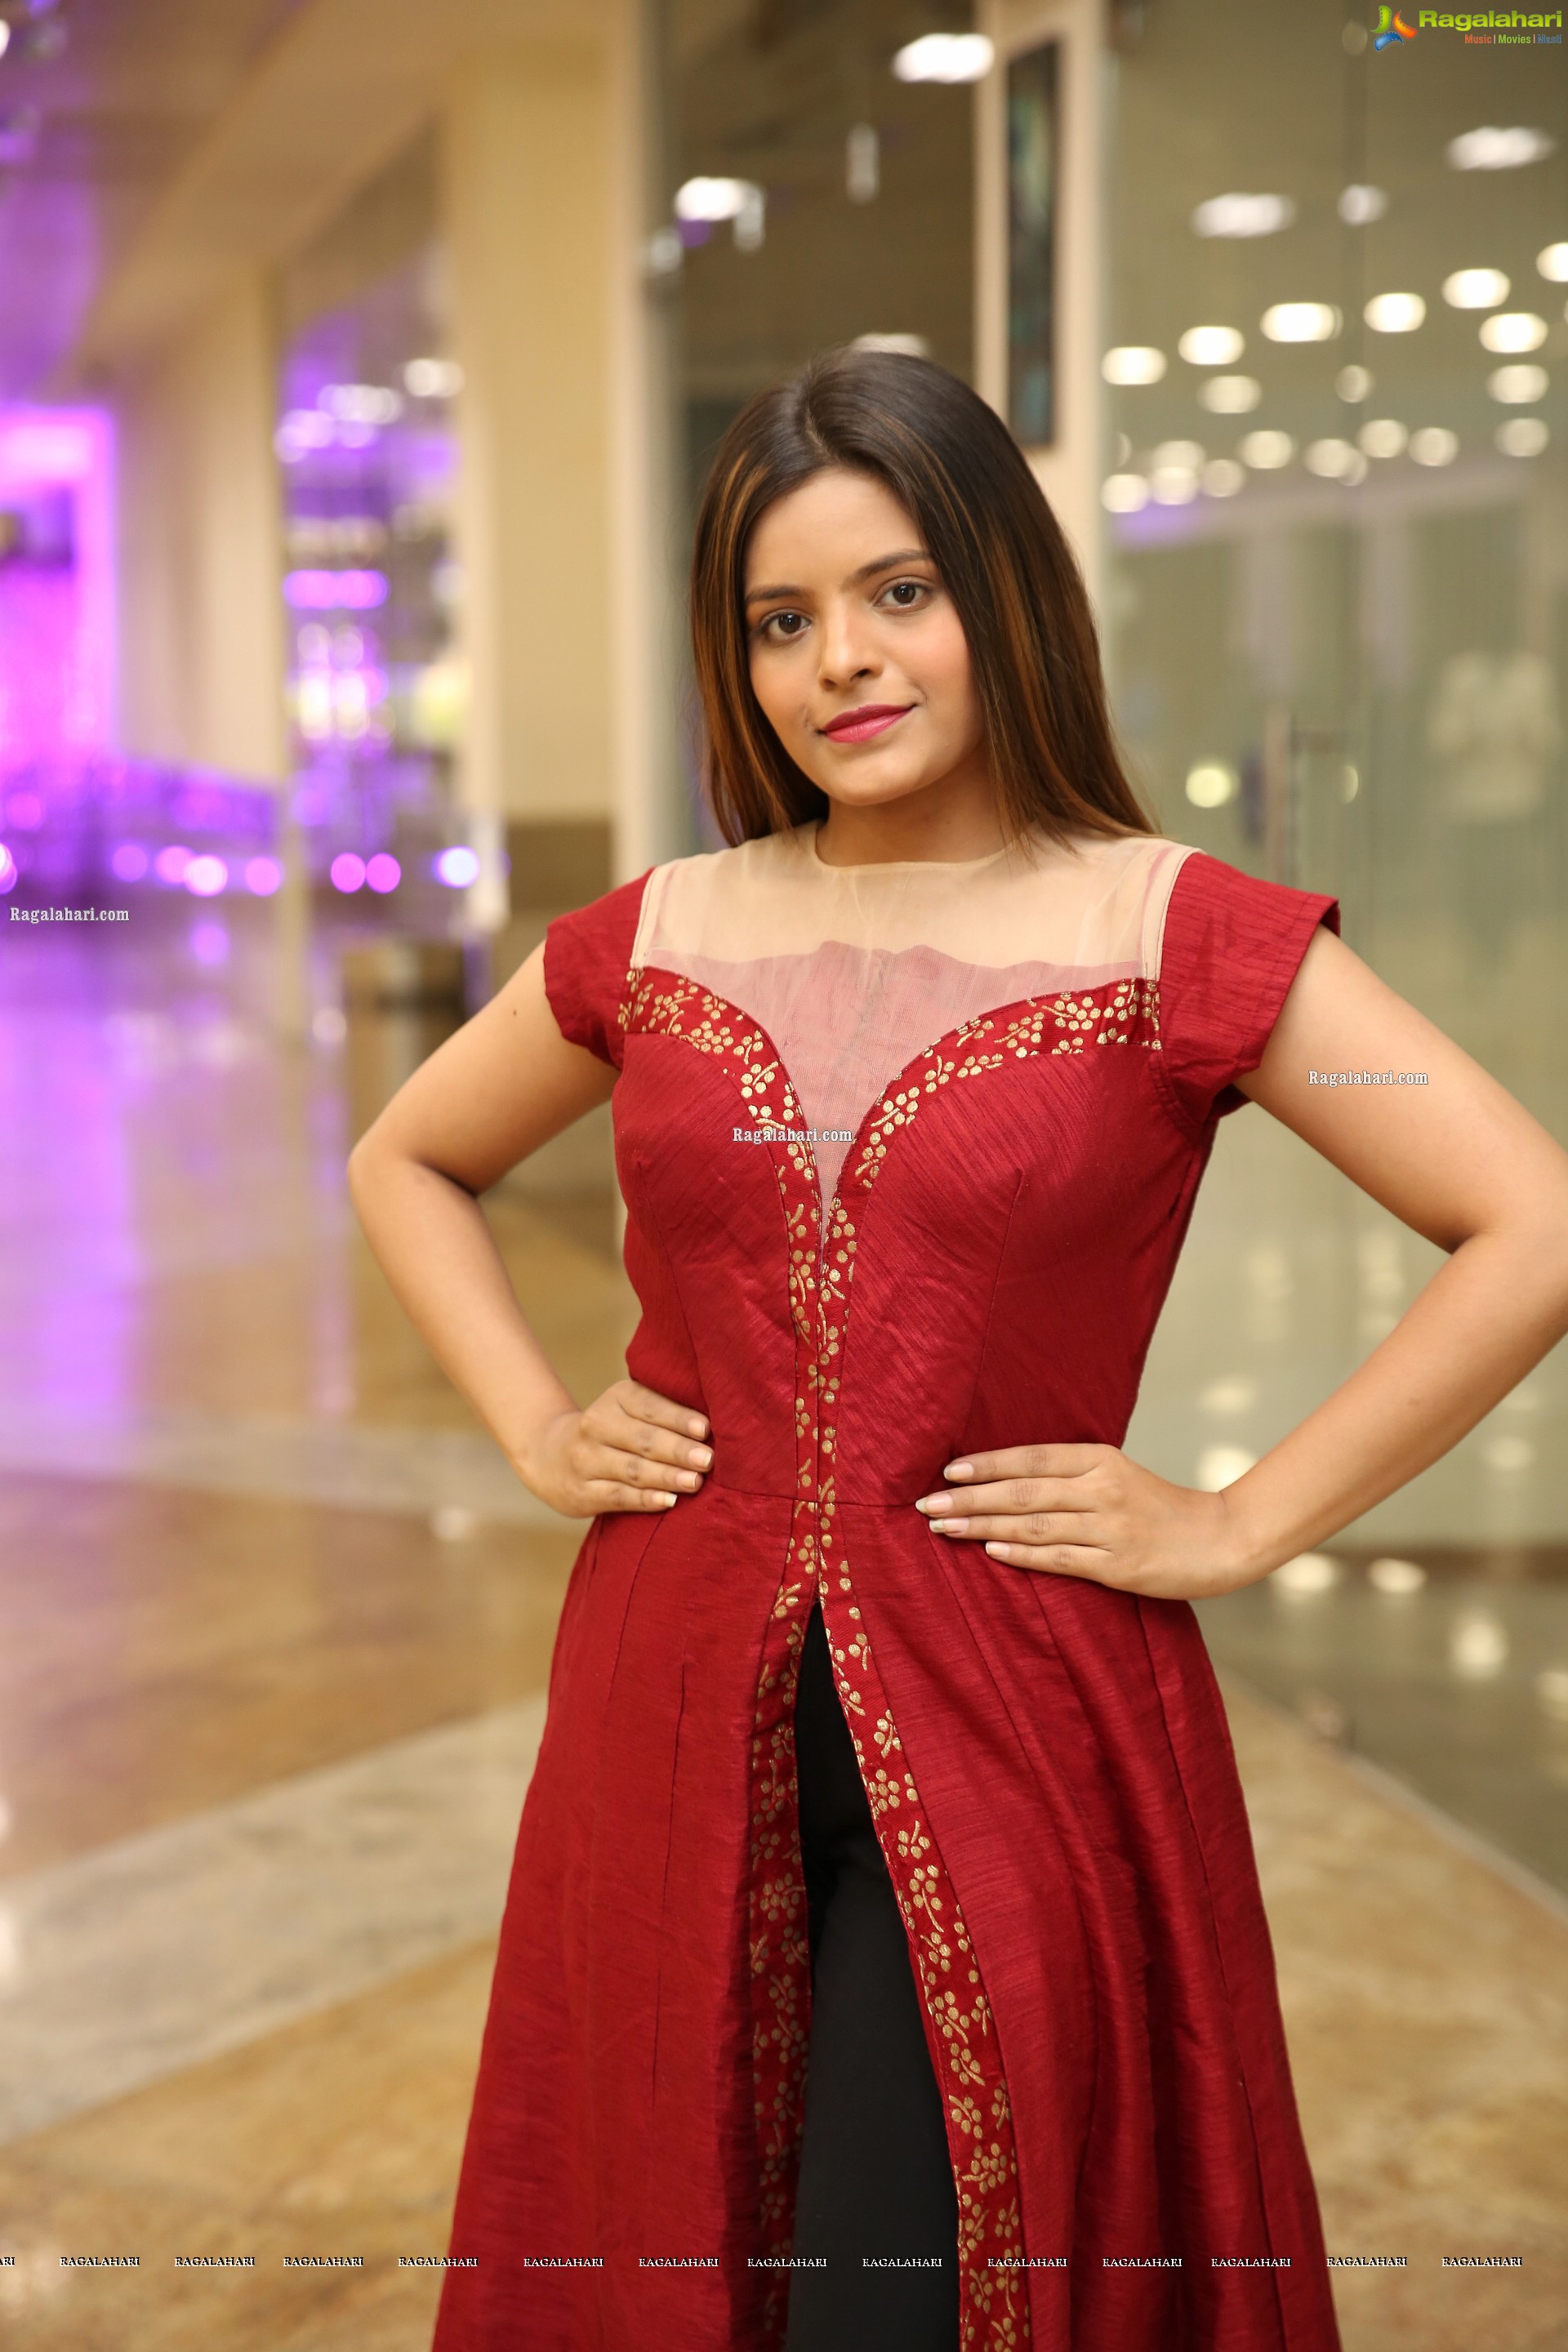 Kusumm in Red Fashionable Front Slit Kurti, HD Photo Gallery